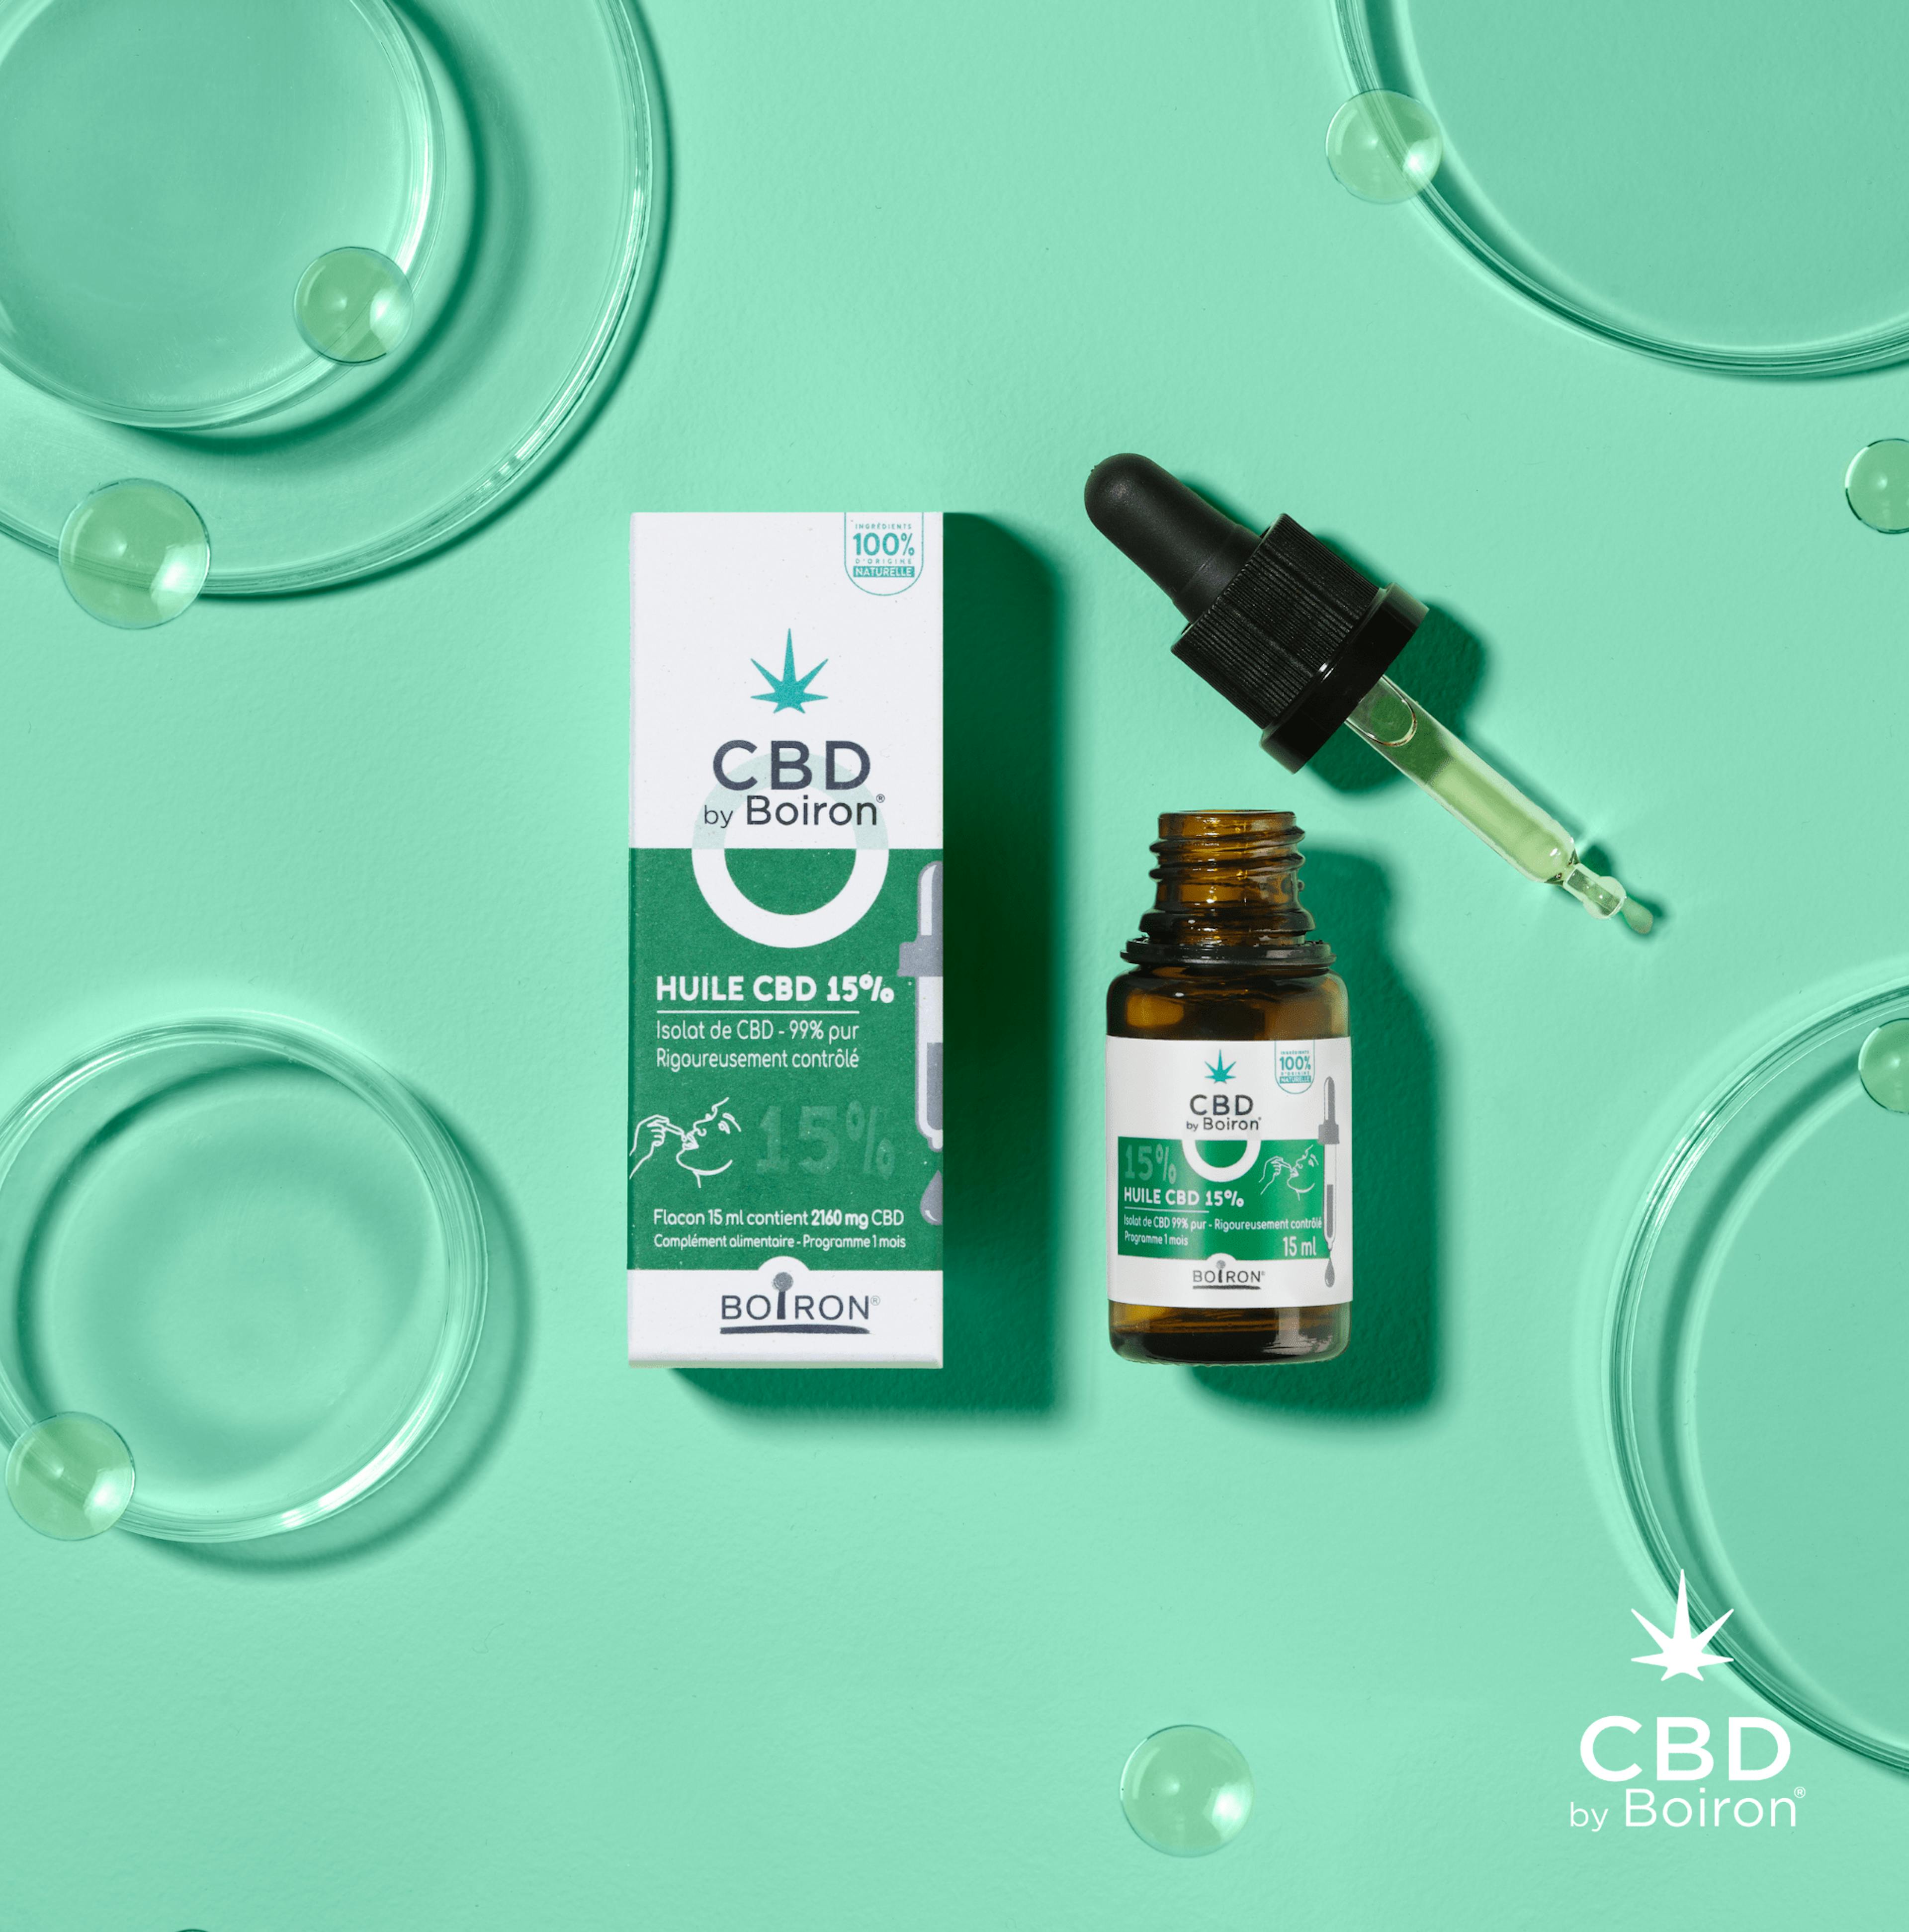 Huiles pures 15% CBD BY Boiron